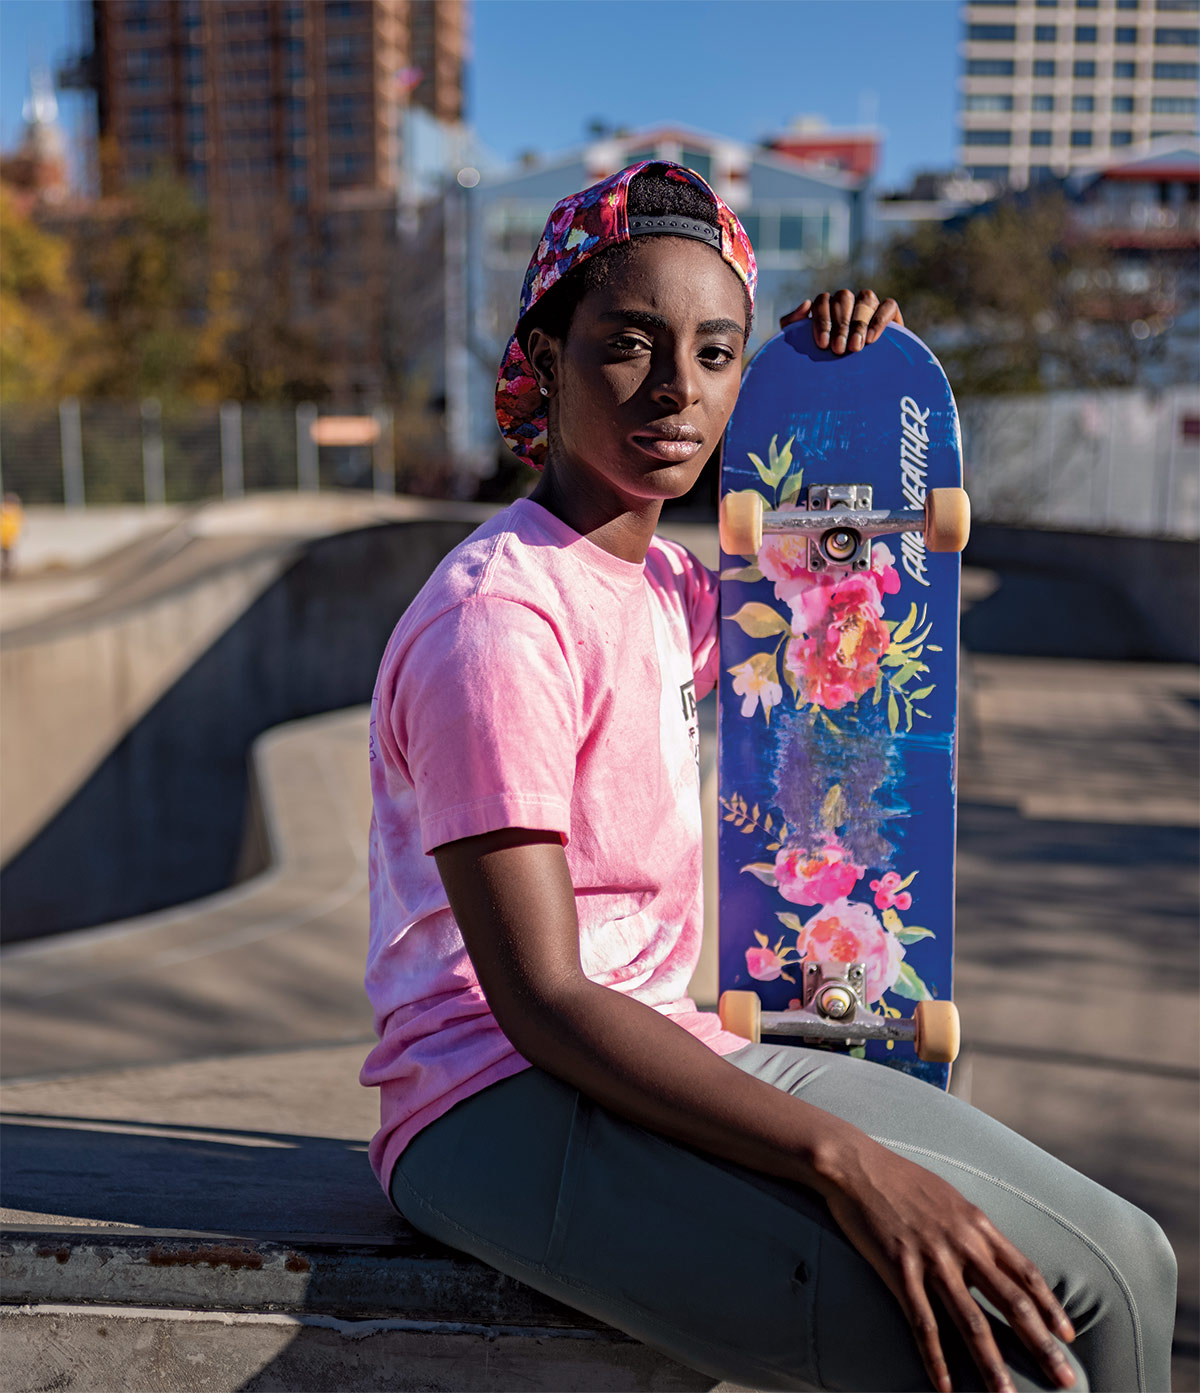 Mame Bonsu, wering a pink tie-dye t-shirt and multicolored ballcap, turned backward, sits on a ledge in a skatepark, holding her blue floral skateboard